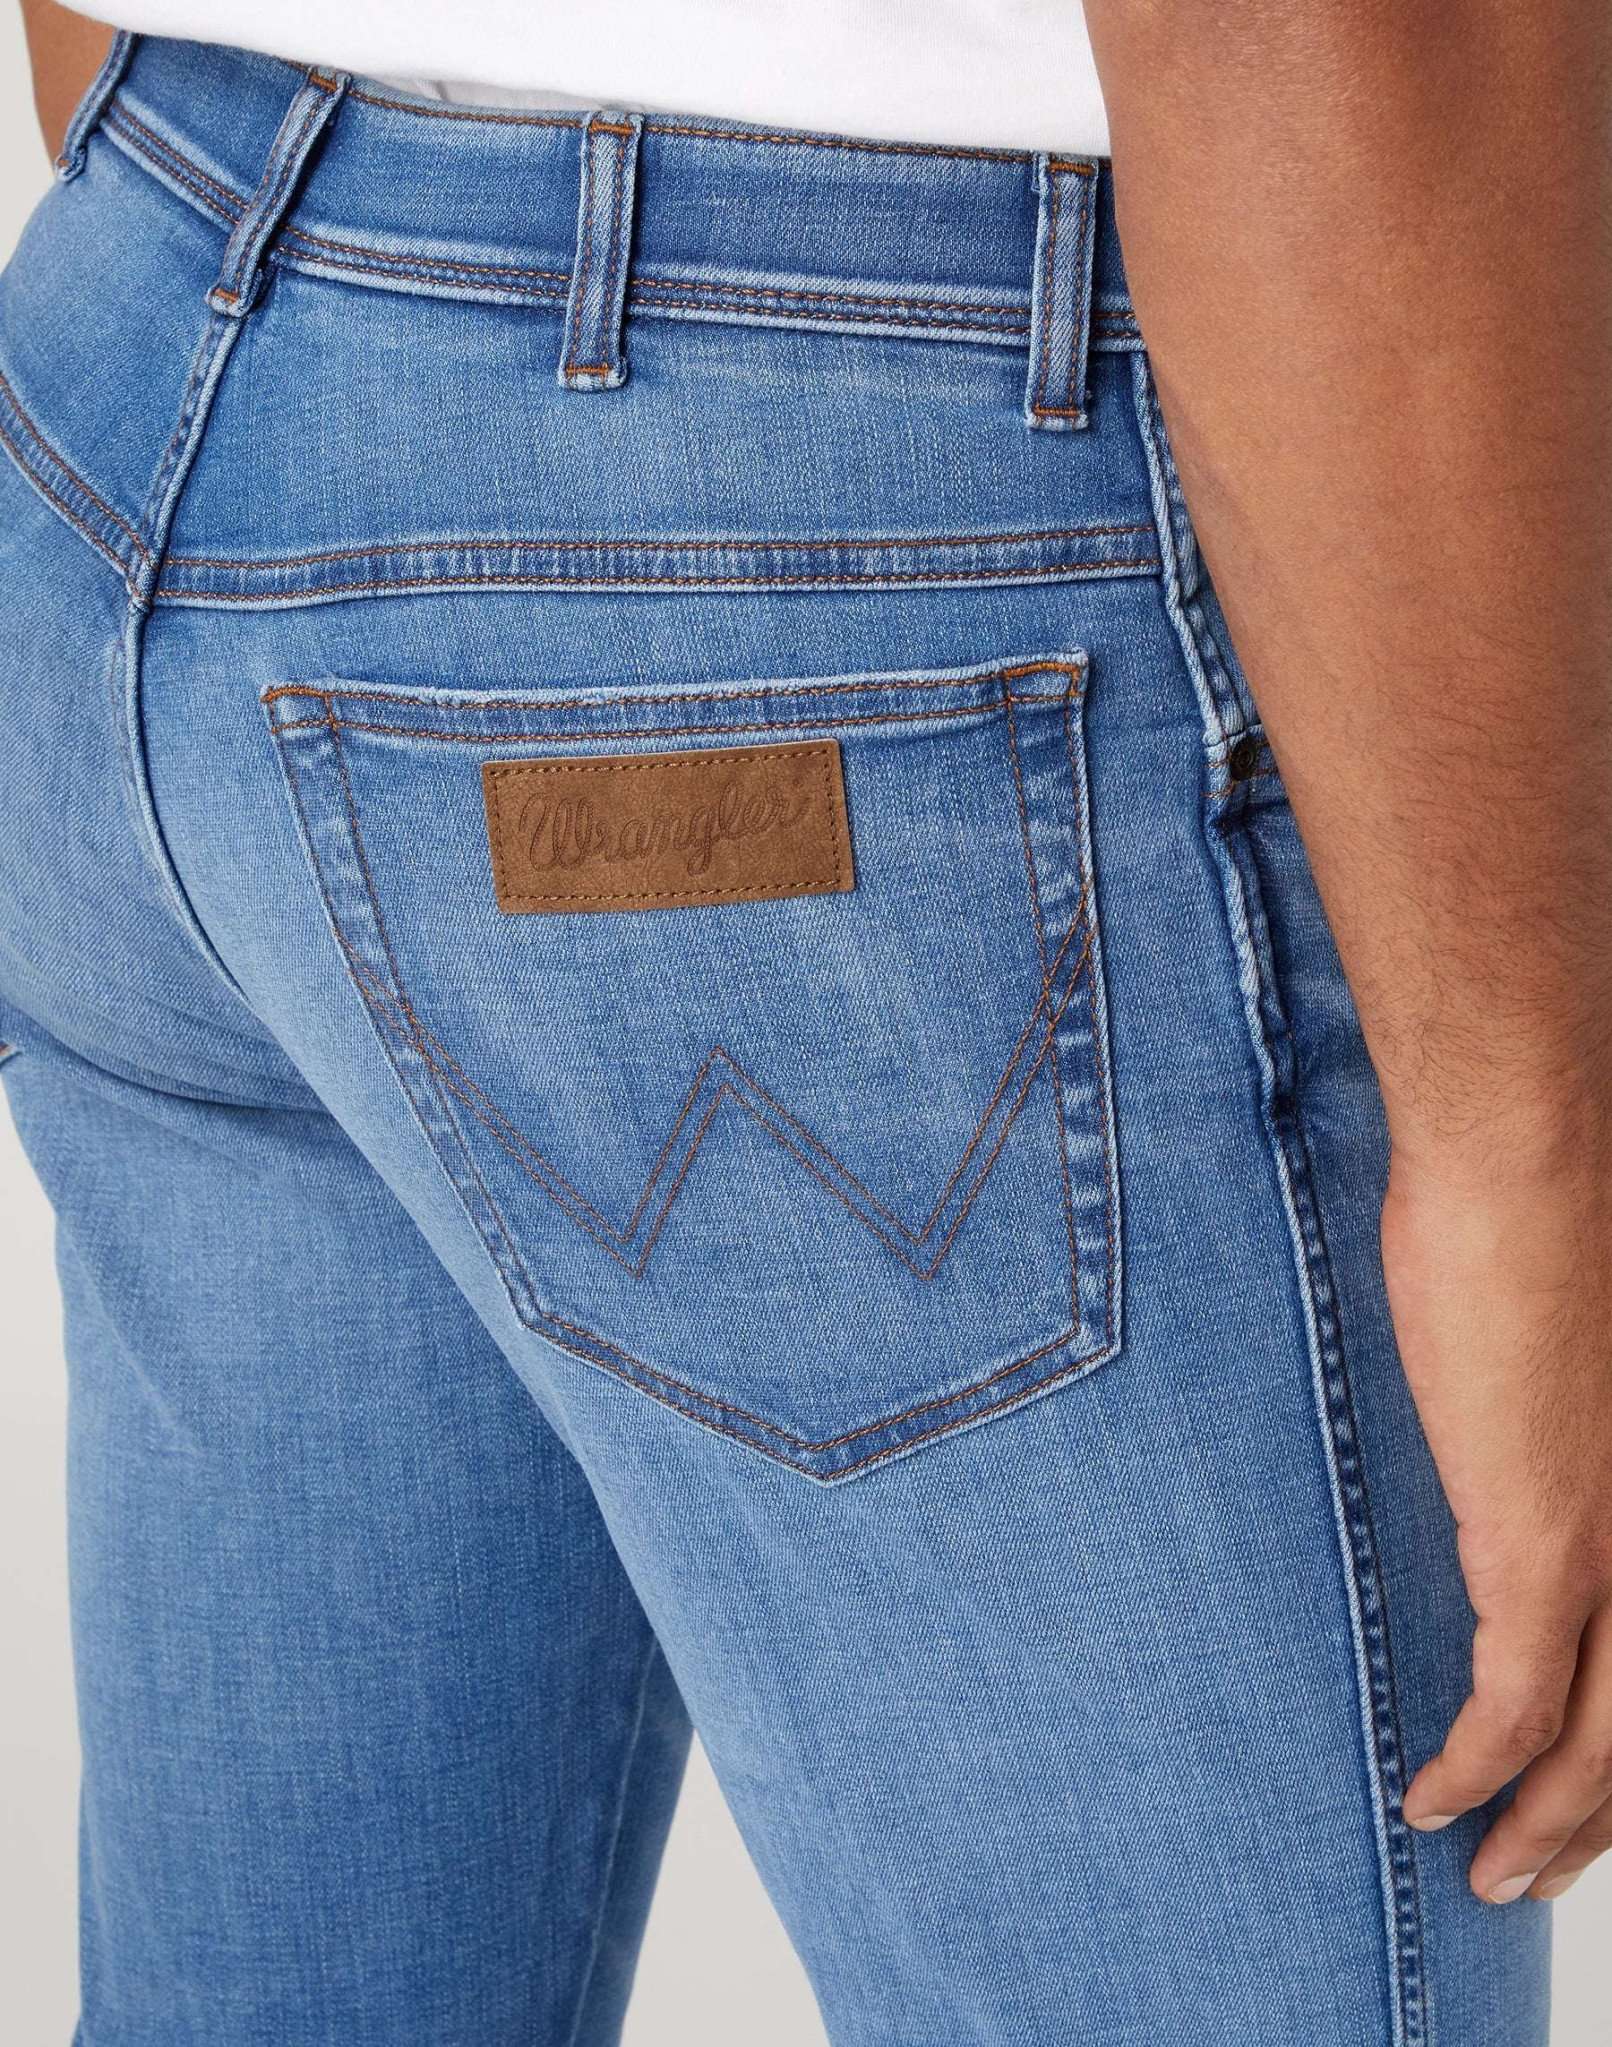 Texas Slim High Stretch in On Point Jeans Wrangler   